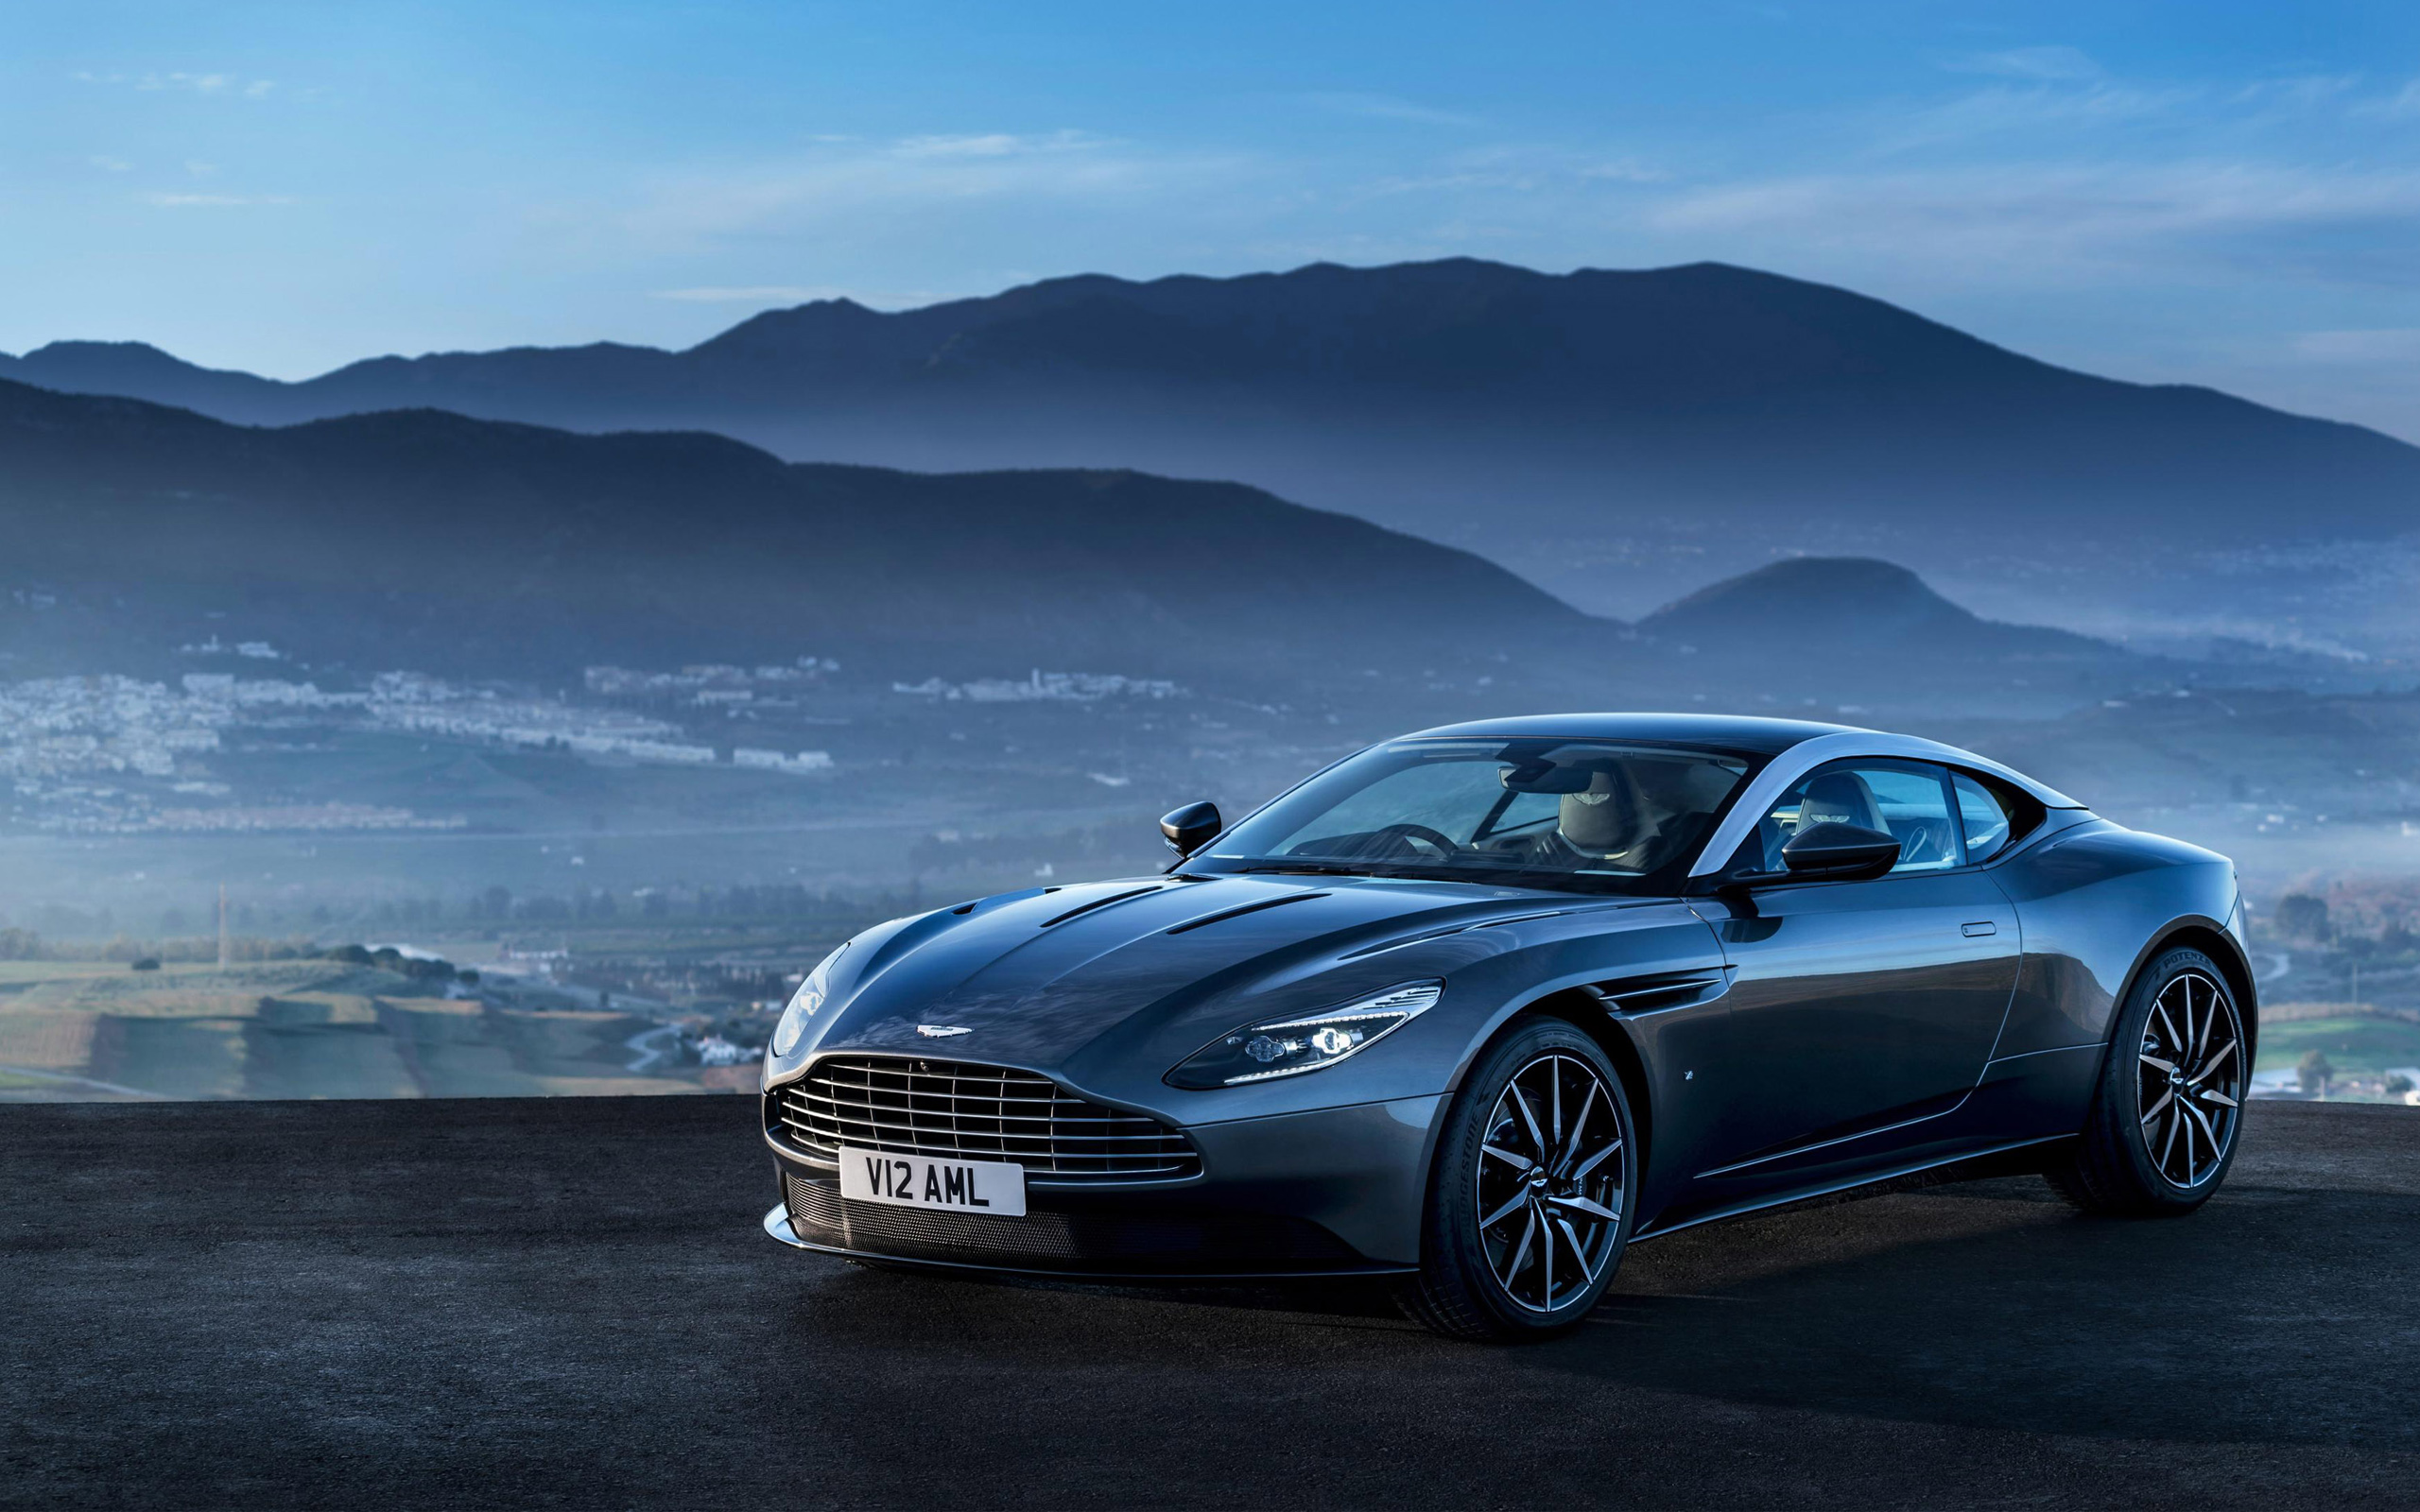 2560x1600 Aston Martin Db11 2560x1600 Resolution Hd 4k Wallpapers Images Backgrounds Photos And Pictures